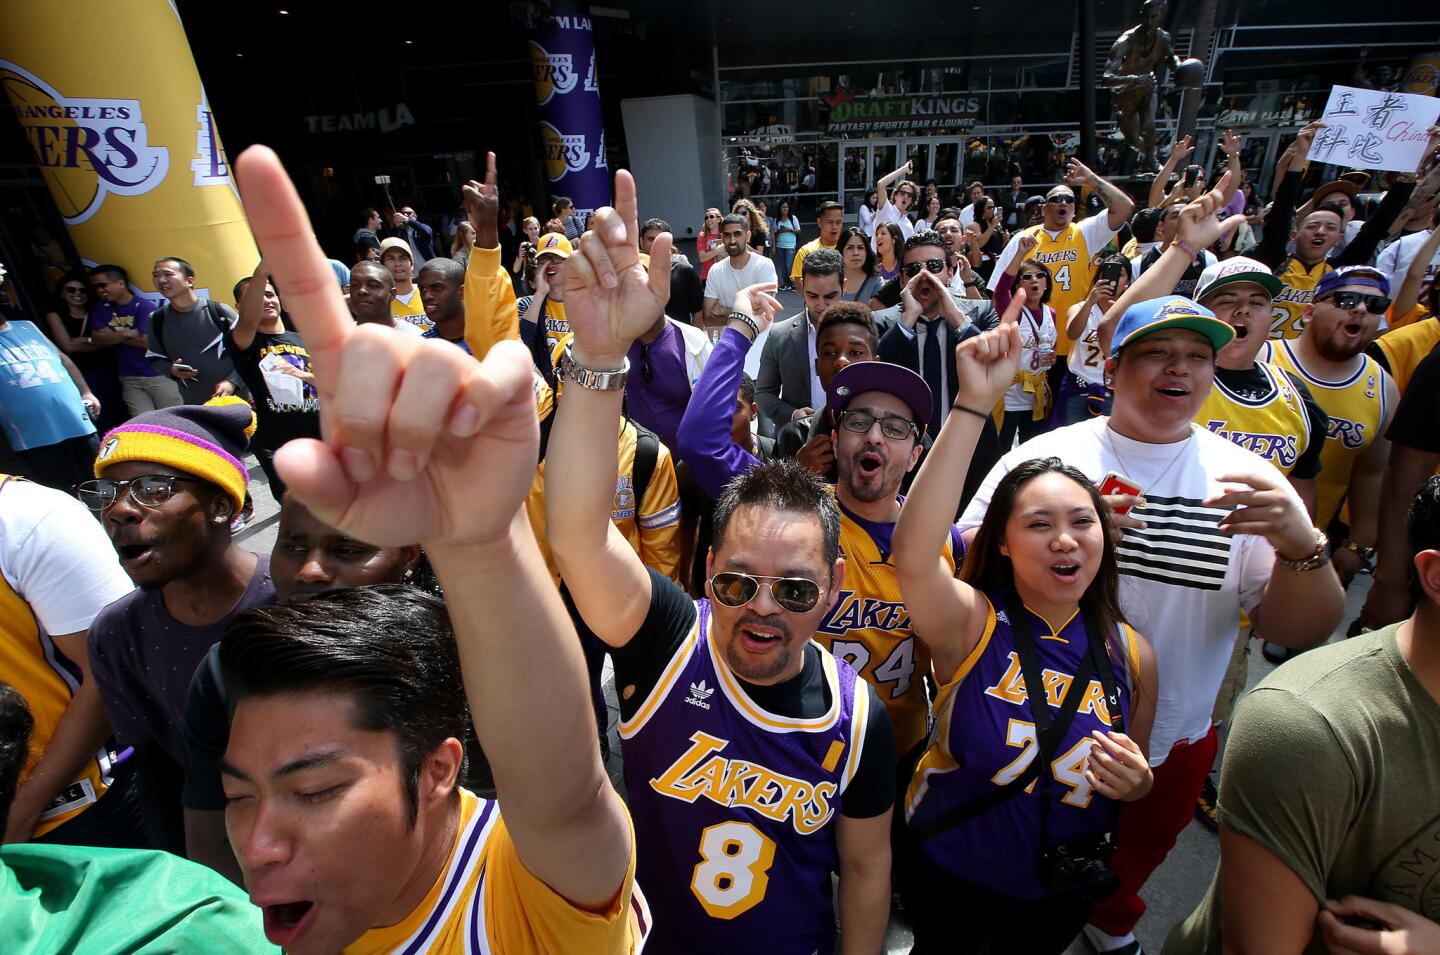 LOS ANGELES, CALIF. - APR. 13, 2016. Lakers fans get a Kobe chant going outside Staples Center in Los Angeles before Laker great Kobe Bryant's final game on Wednesday, April 13, 2016. (Luis Sinco/Los Angeles Times)